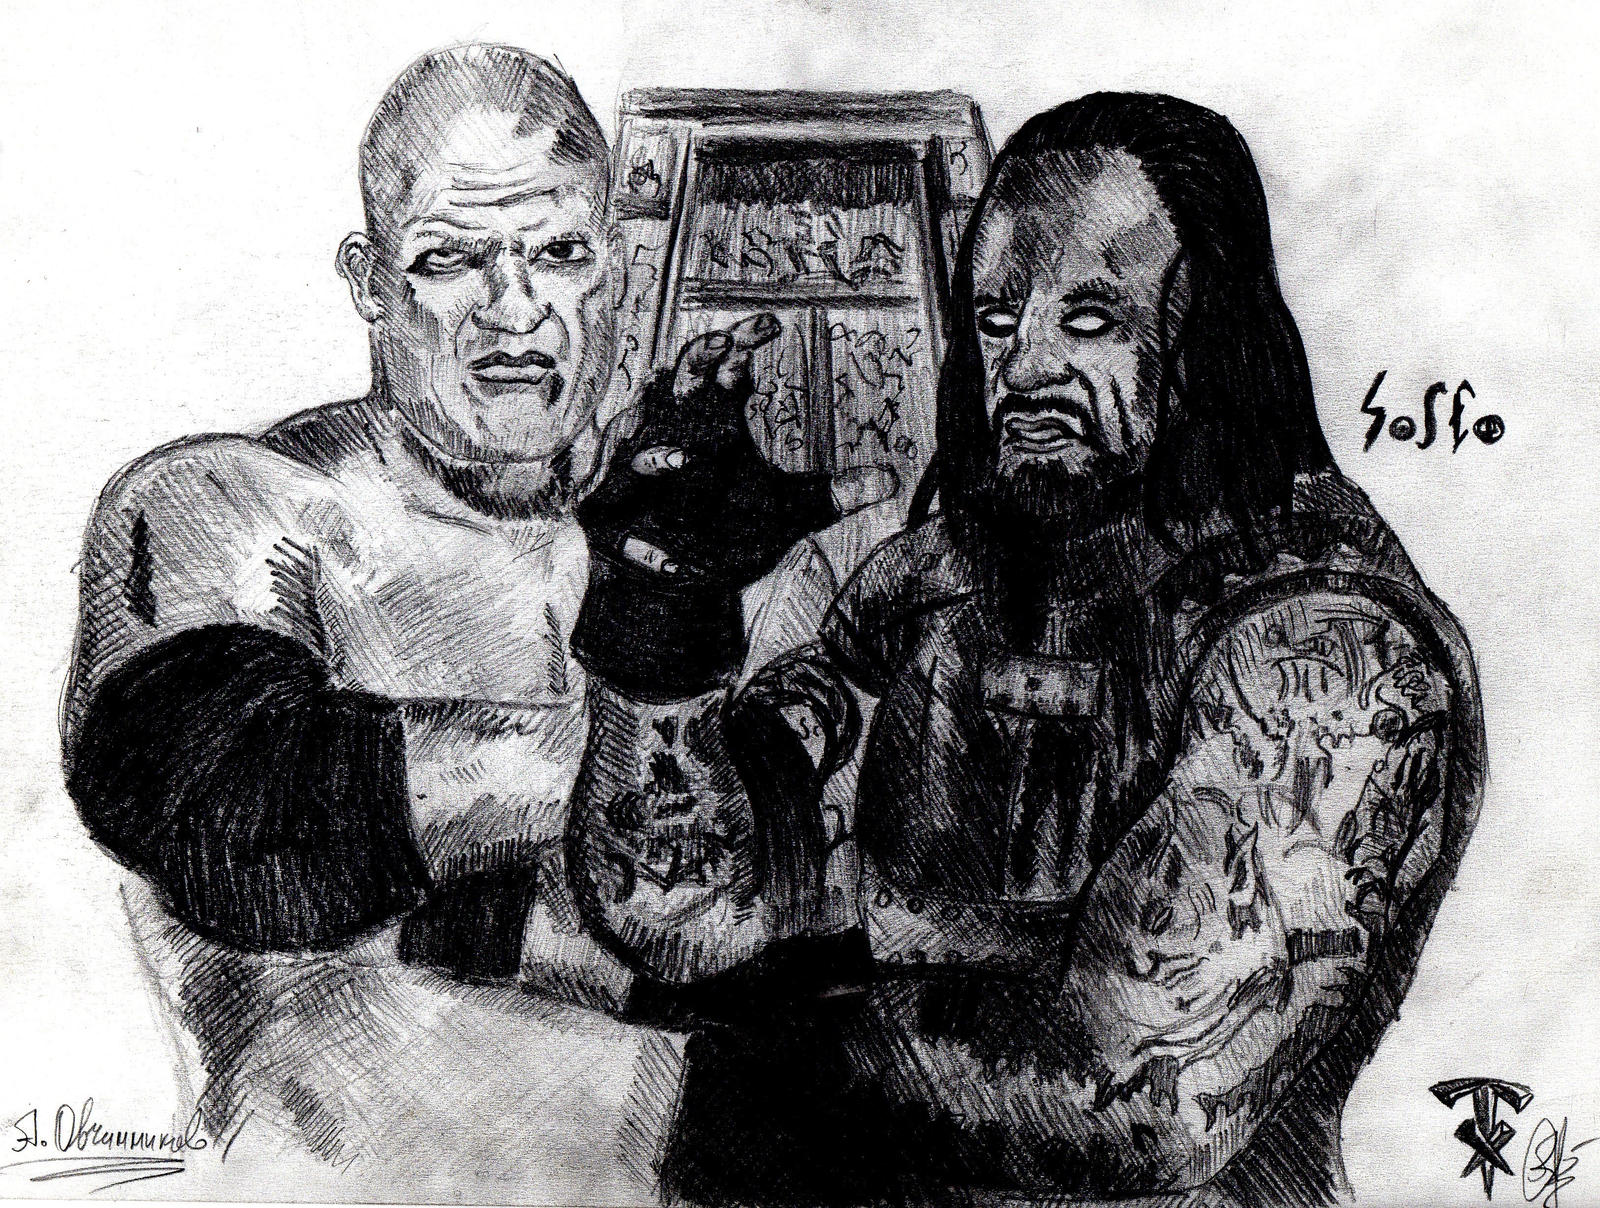 Kane And The Undertaker Brothers Of Destruction By Solfo12 On DeviantArt.